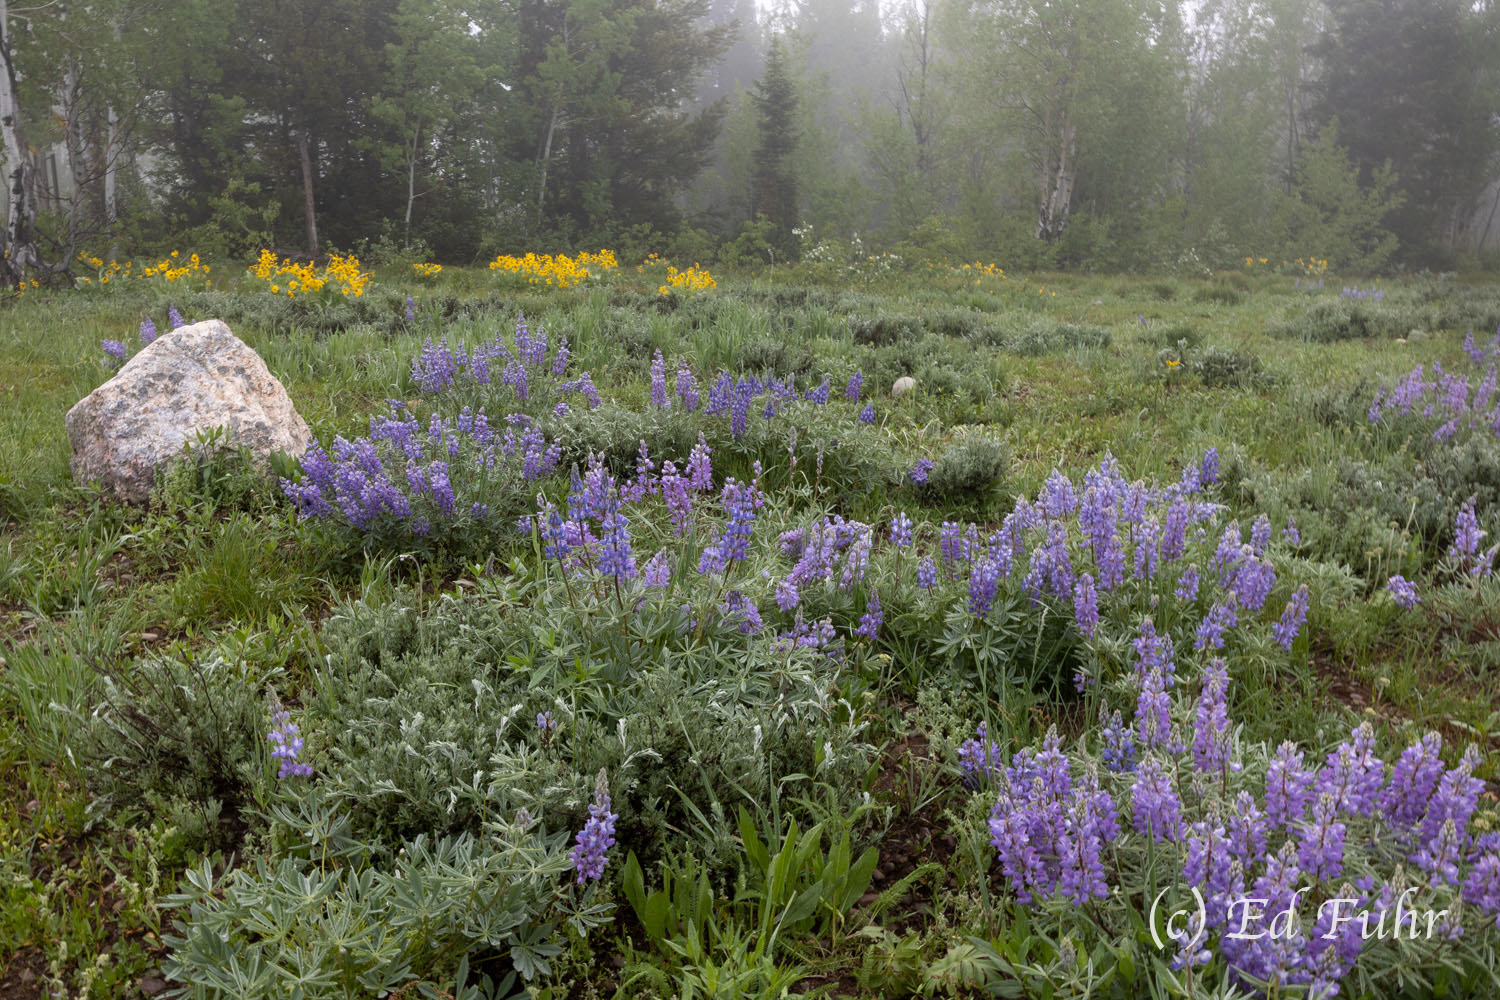 Morning fog provides a soft blanket over this meadow of lupines and wildflowers.